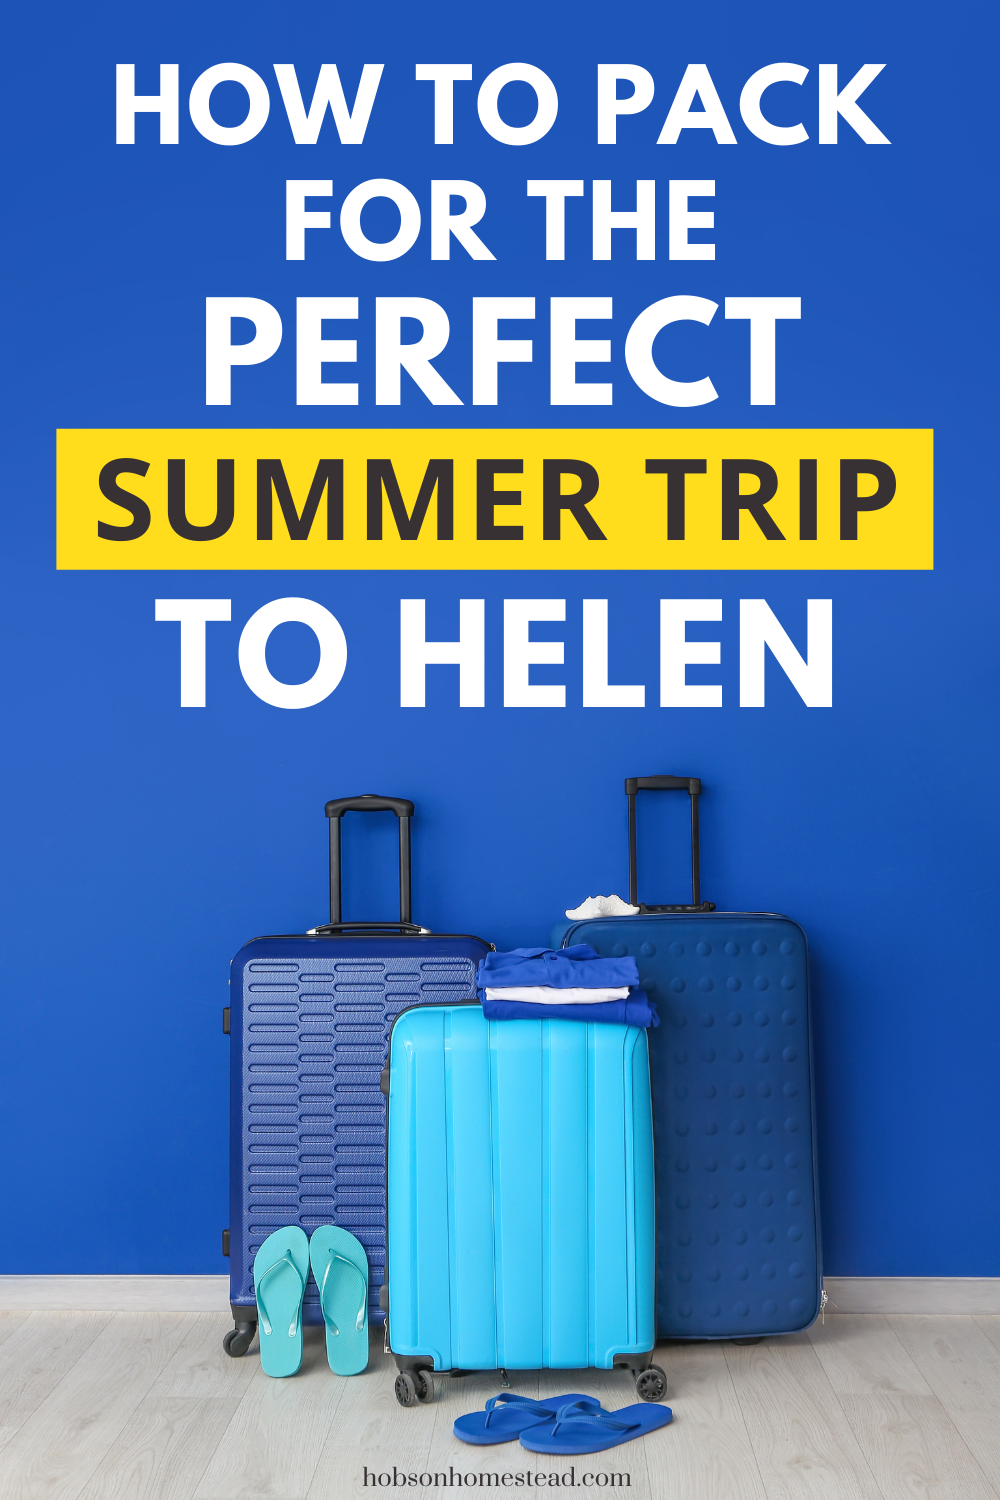 How to Pack for the Perfect Summer Trip to Helen, Georgia